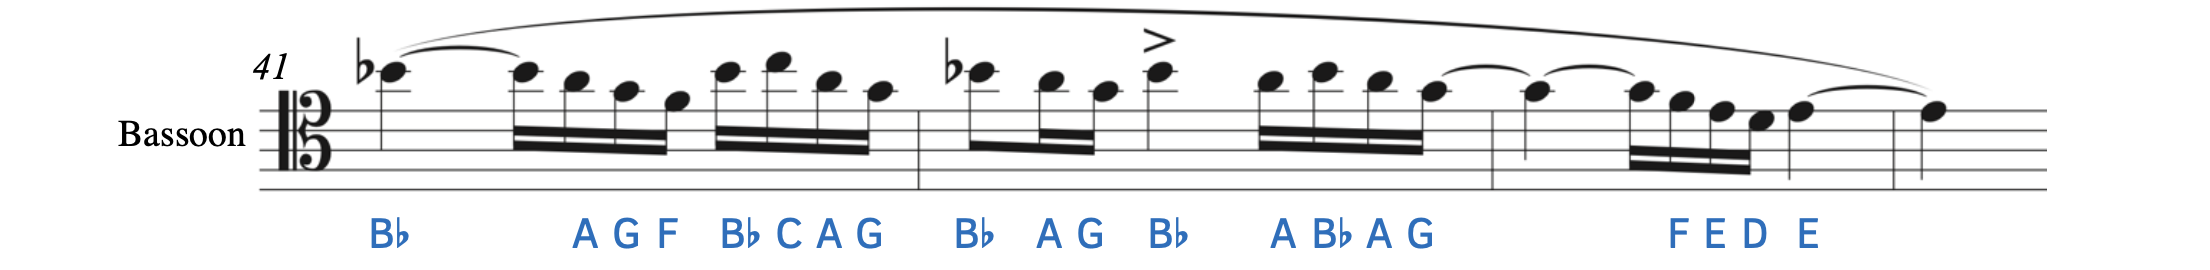 Example from Ravel's Bolero. The bassoon line begins at measure 41 in the tenor clef. The first note is a flatted quarter note with two ledger lines above the staff. In tenor clef, this note is B-flat4. The rest of the pitches are given in the tenor clef.